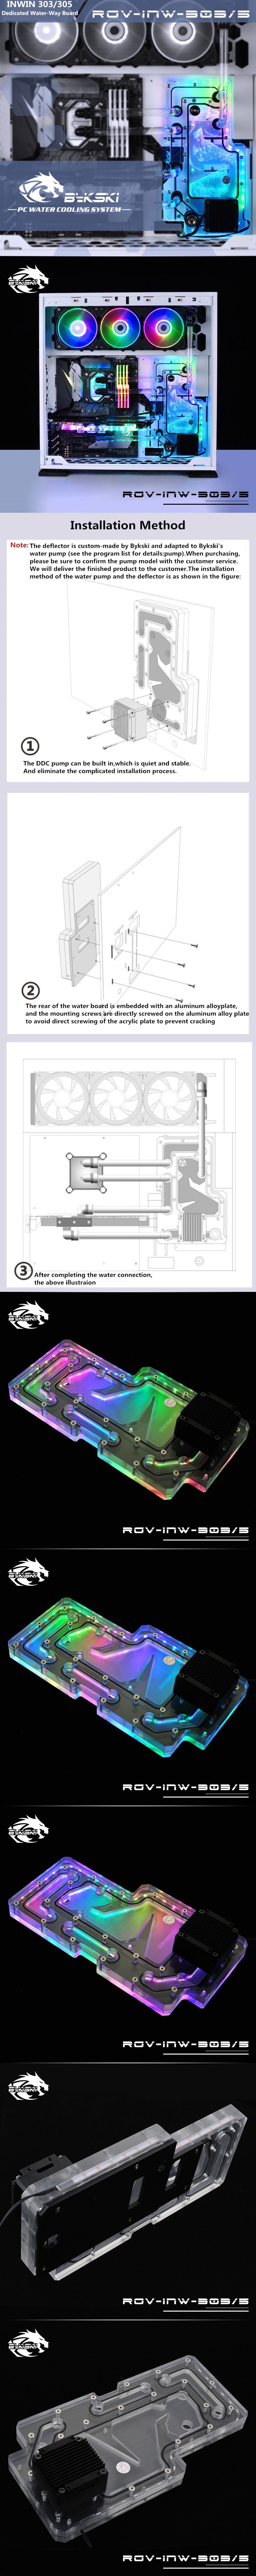 A large marketing image providing additional information about the product Bykski InWin 303/305 Case RBW Water Distribution Board - Additional alt info not provided